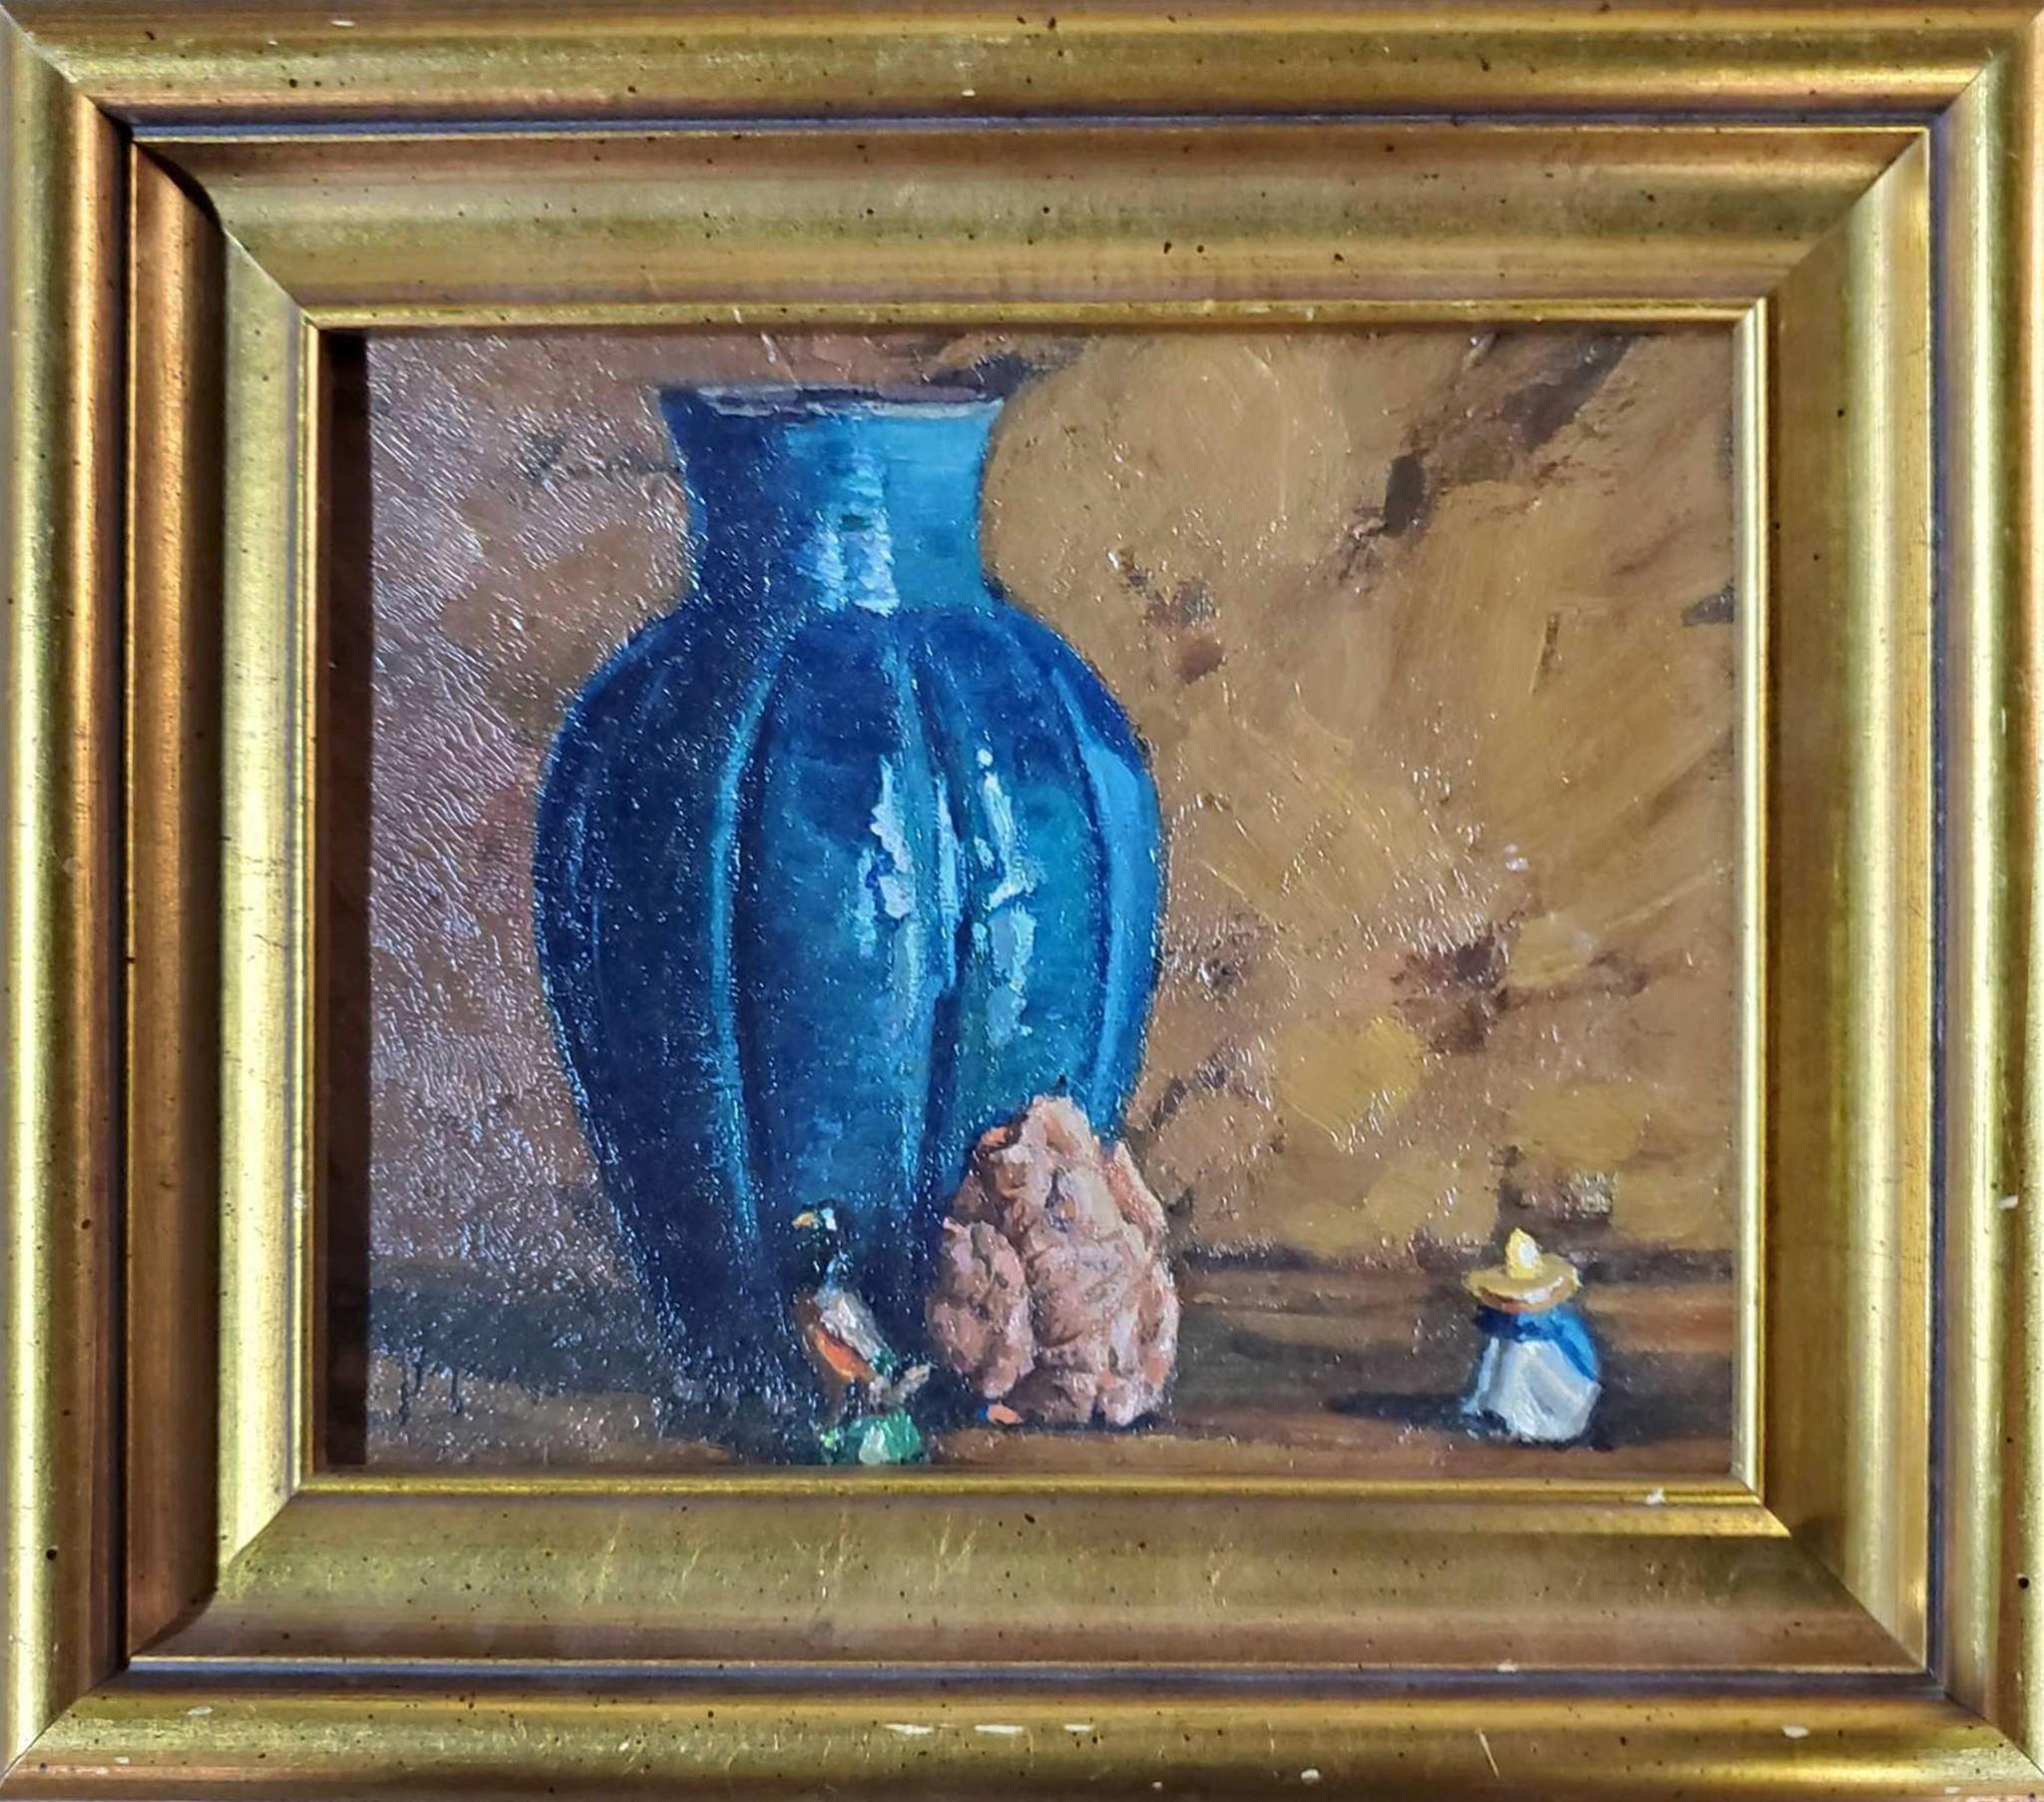 Harry William Powers (1880 - 1957) was active/lived in Massachusetts. "Still Life With Blue Vase"